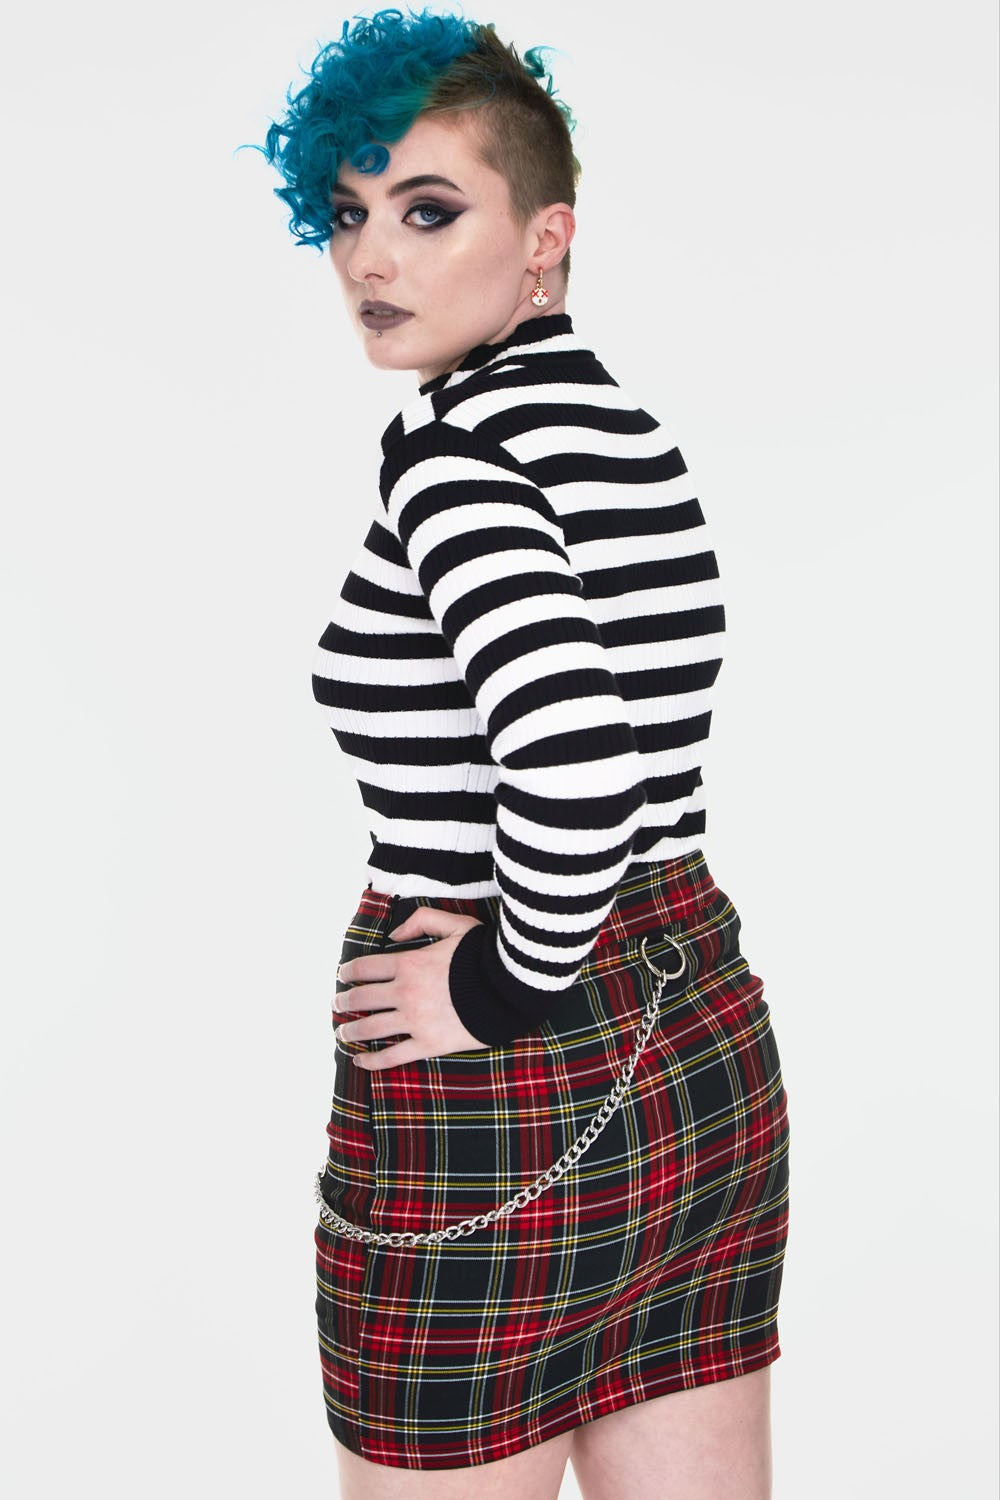 The back of the Tartan Tube Skirt with Lace-Up Front Panel.